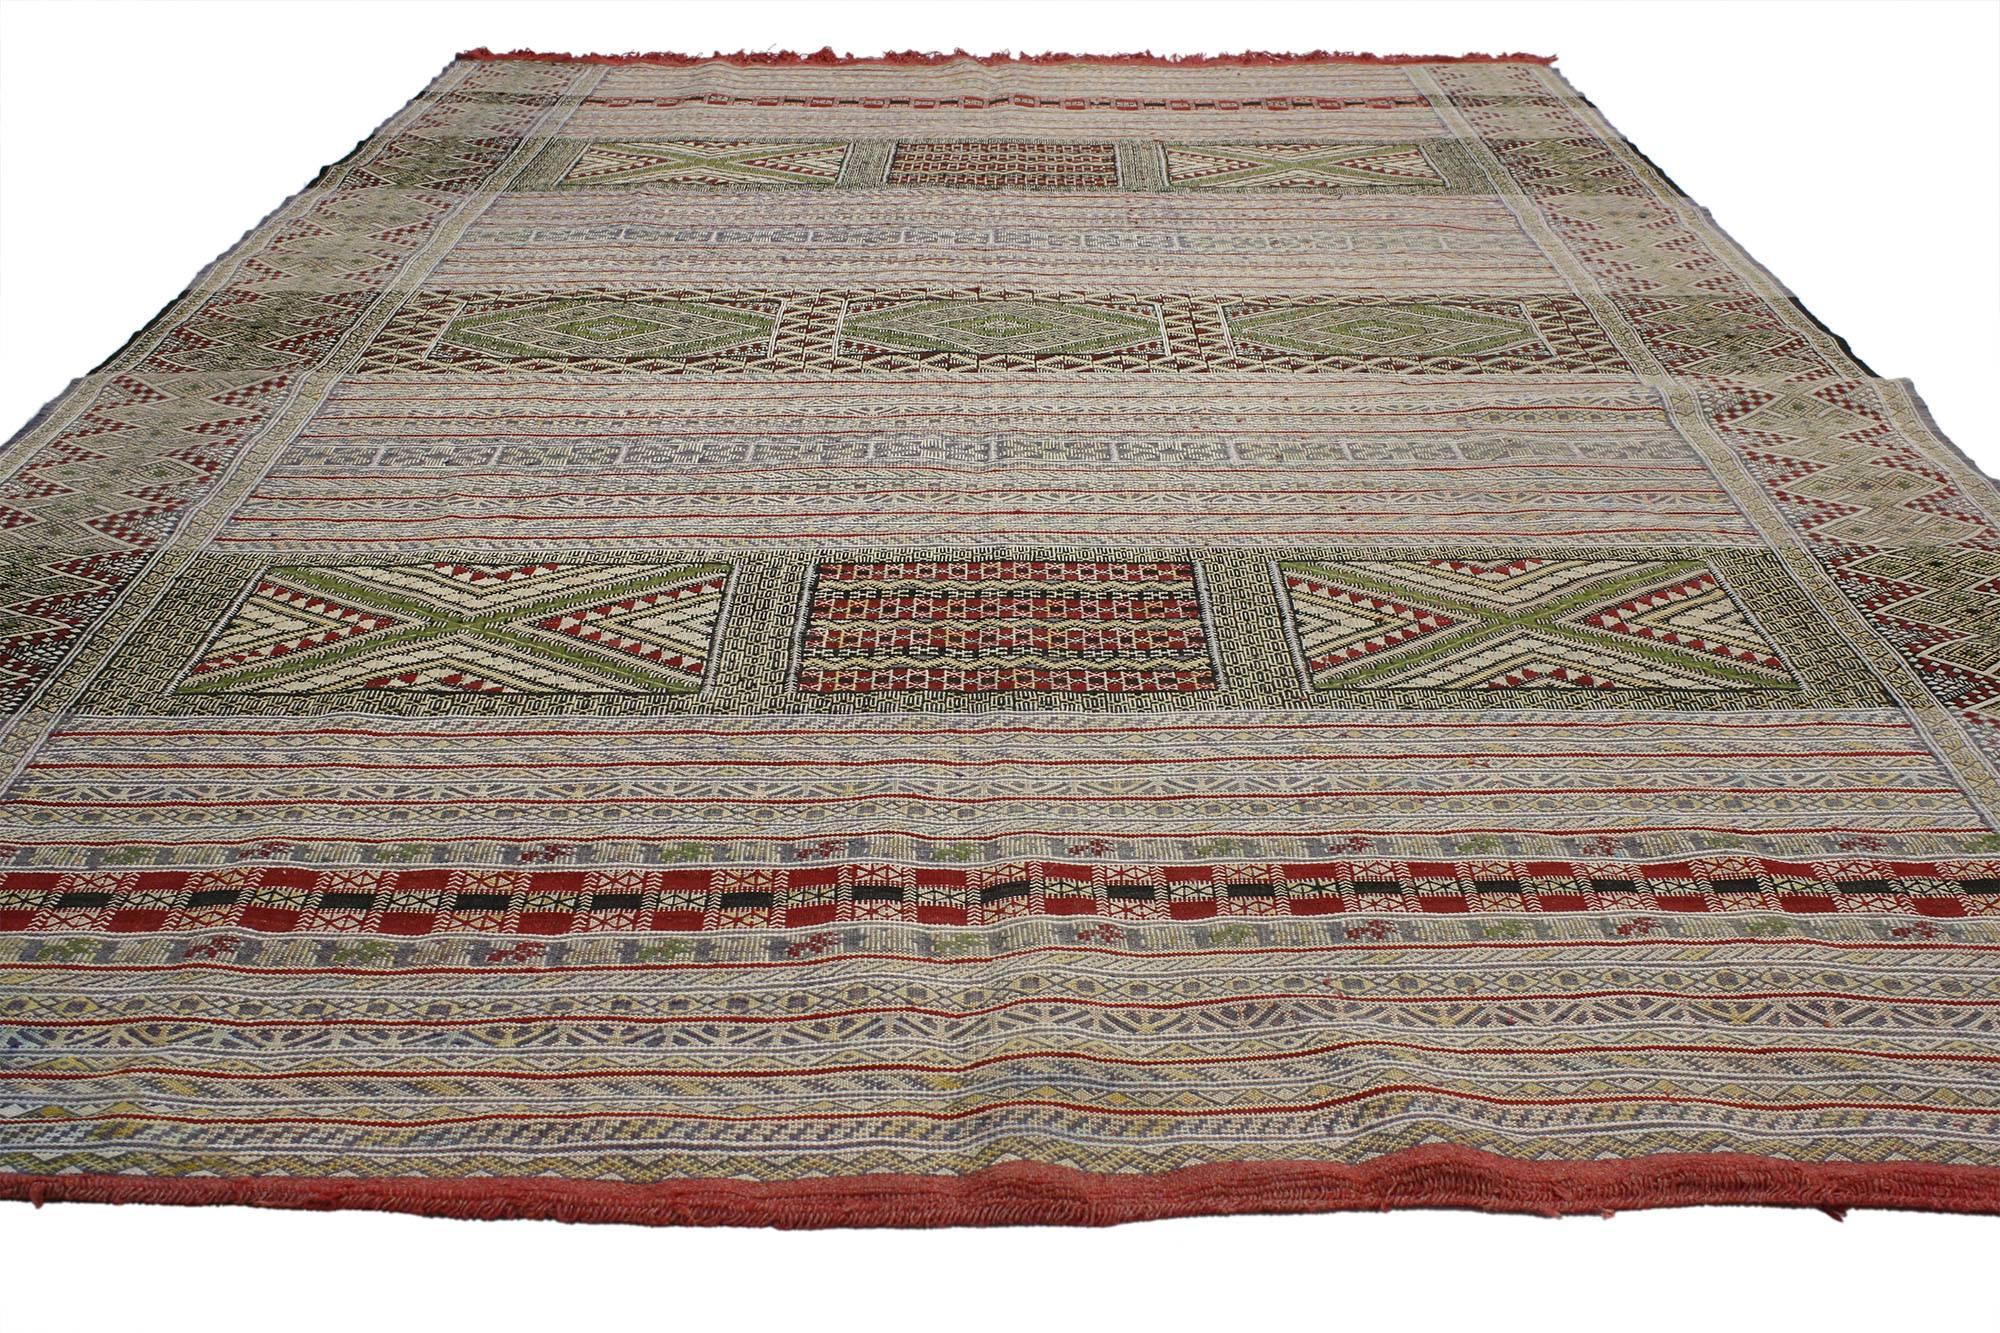 77008, muted tones of red, tan, beige, cream, green, grey and black provide a beautiful color scheme for the intricate design featured on this vintage Berber Moroccan Kilim rug. This piece is rich in ancient Berber culture, as the design displays a